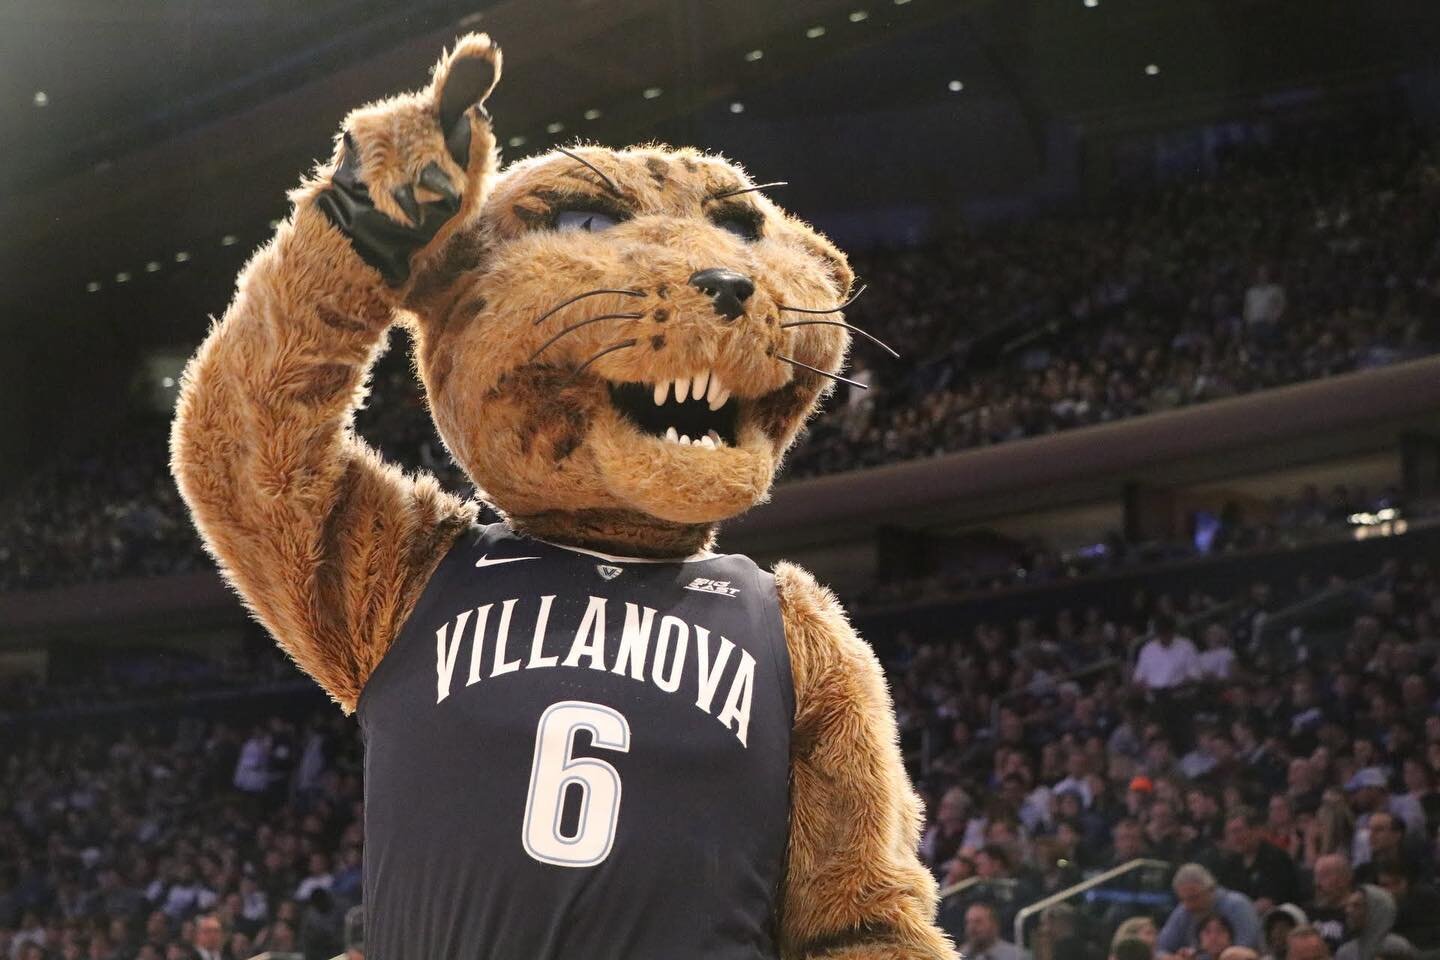 Wishing the happiest #NationalMascotDay to our favorite mascot, @willdcatvu 🐈